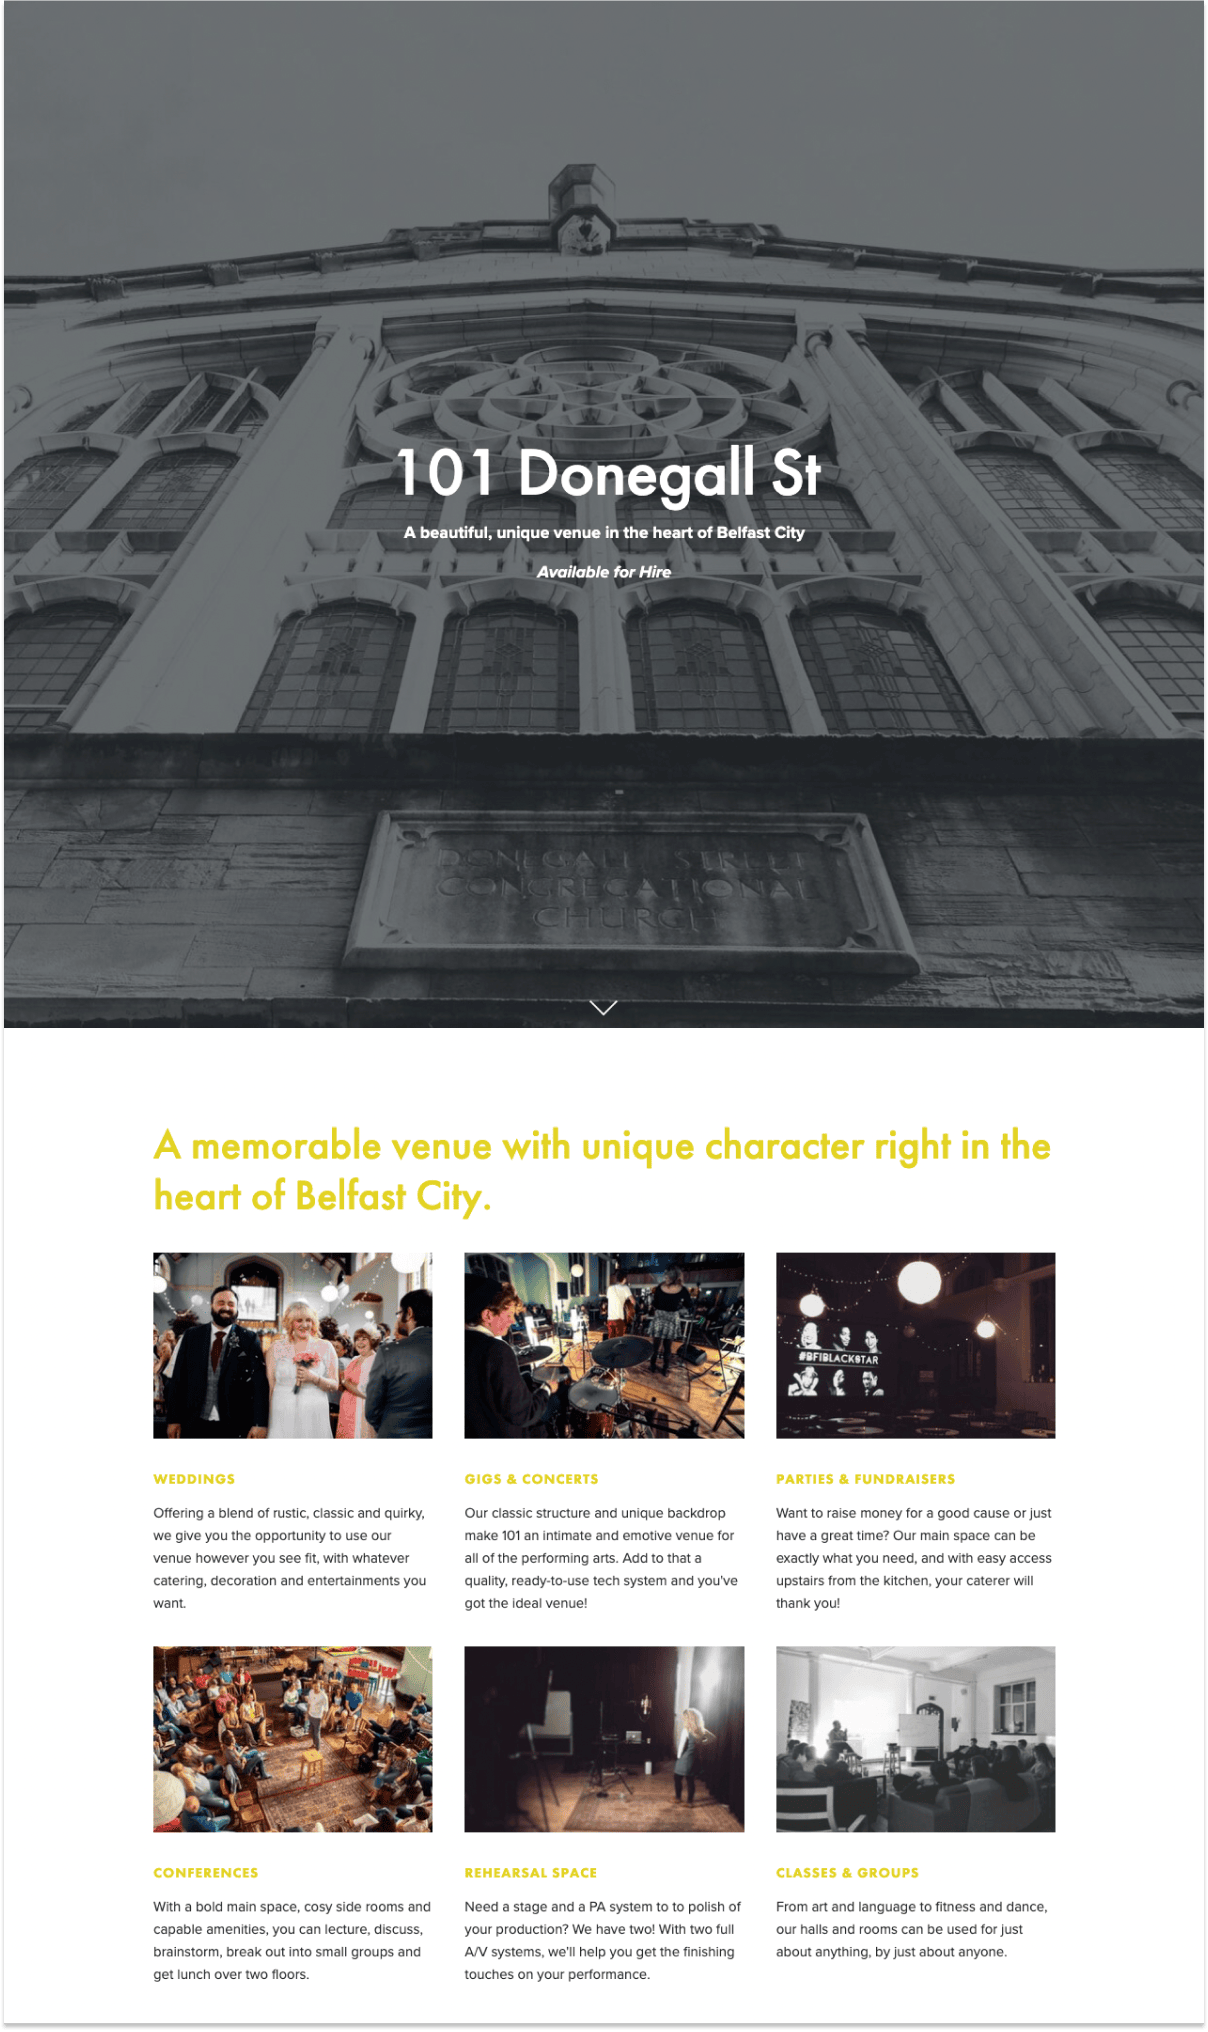 101 Donegall St event space landing page